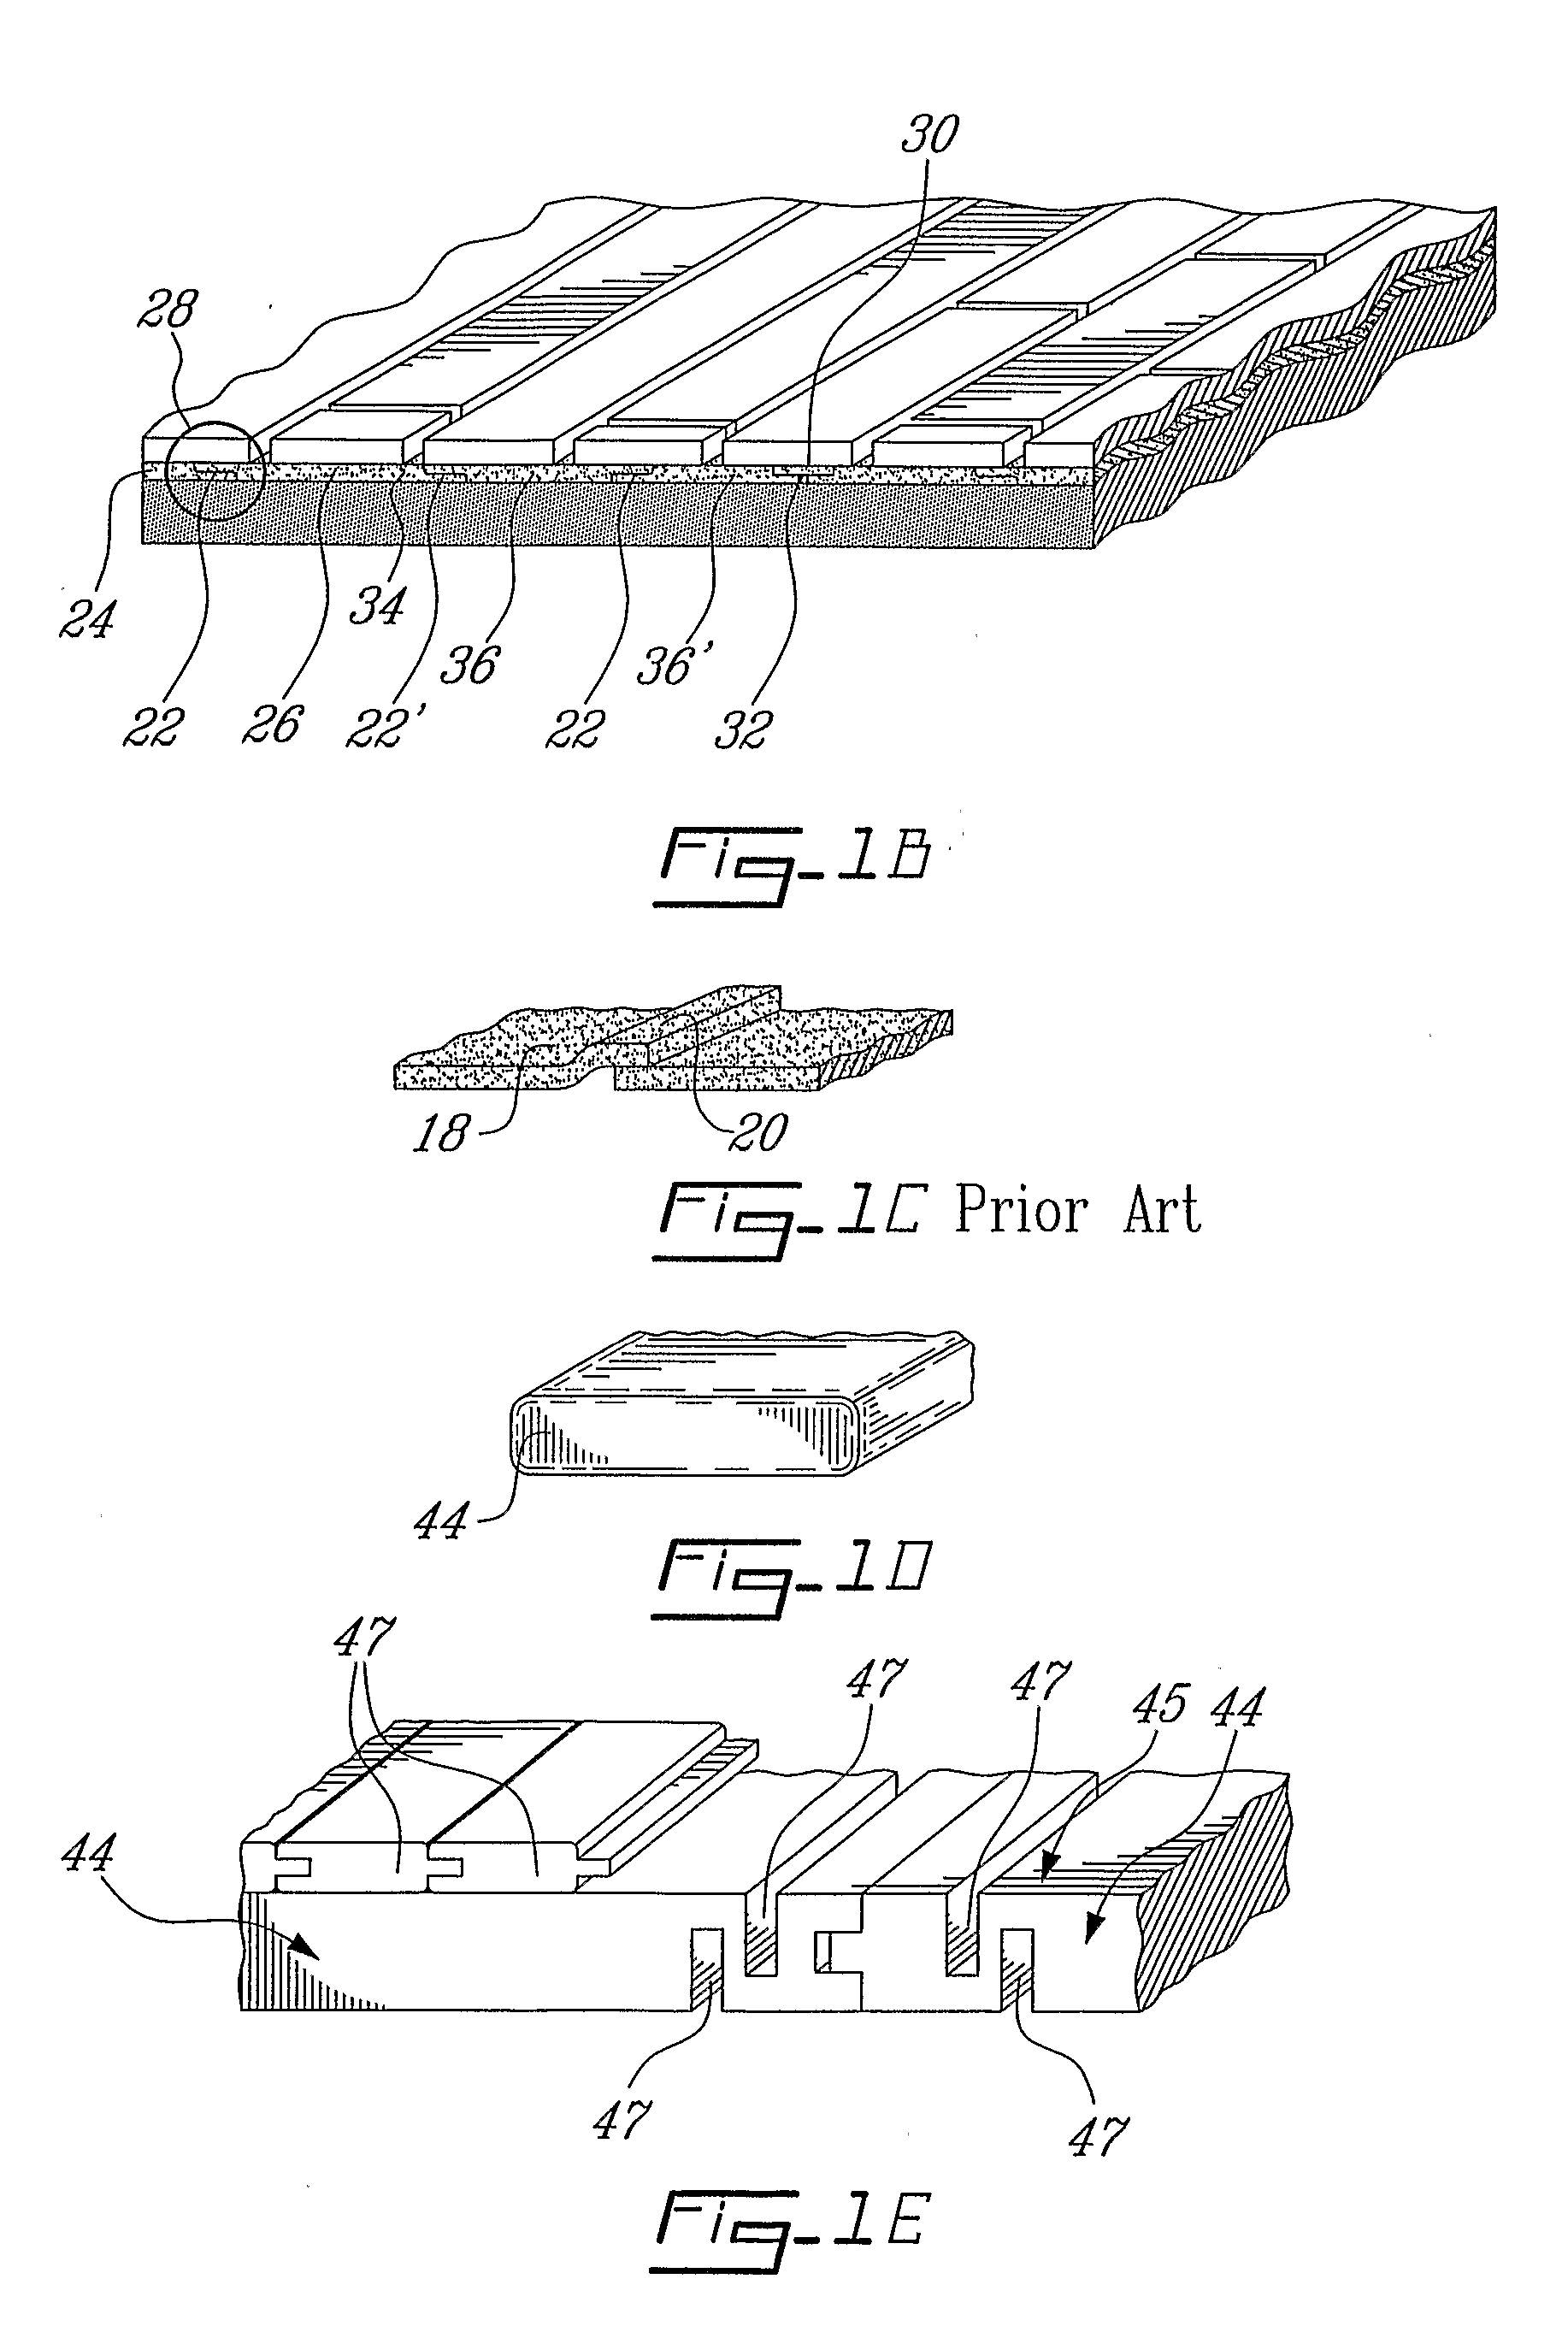 Flexible Insulation Membrane With Flat Overlapping Joints and Method of Installing the Same